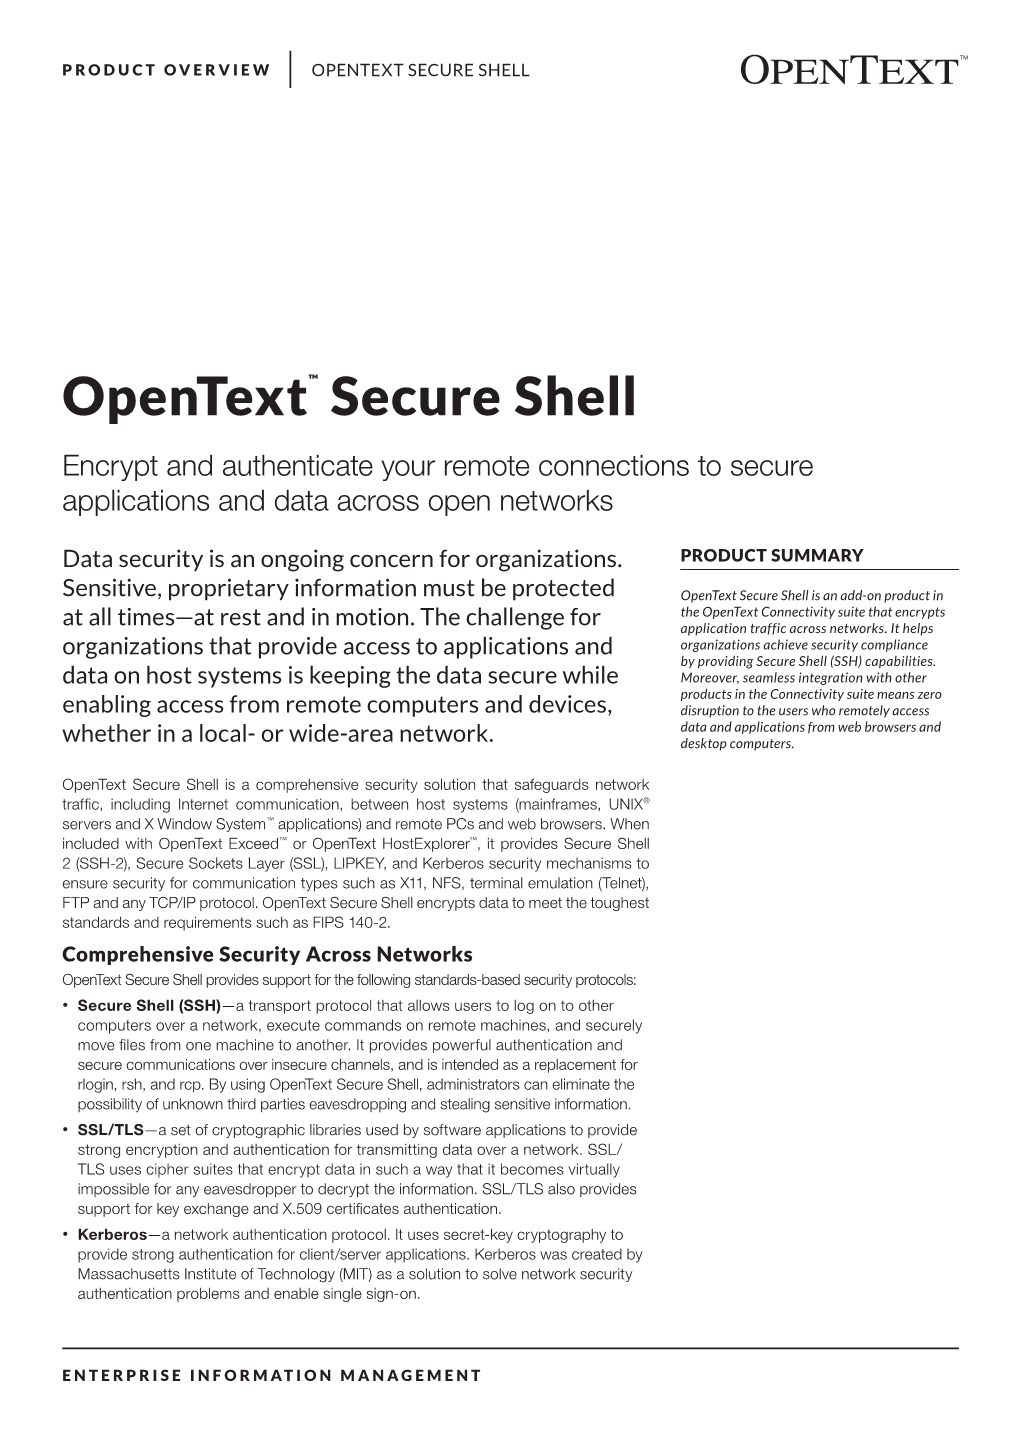 Opentext™ Secure Shell Encrypt and Authenticate Your Remote Connections to Secure Applications and Data Across Open Networks